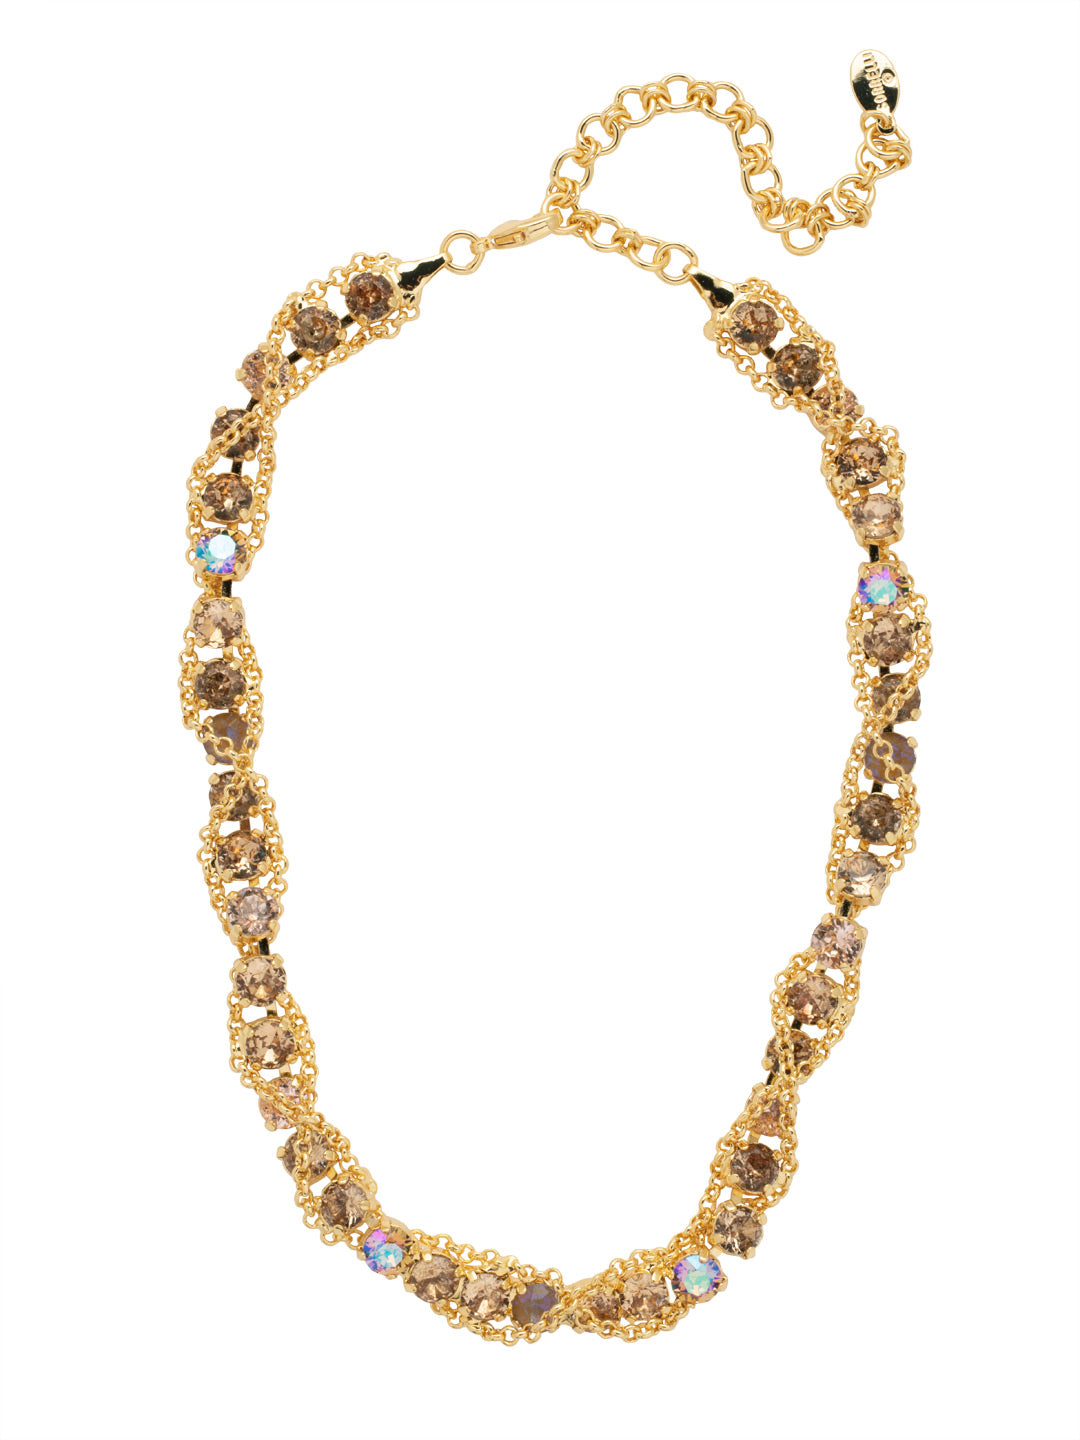 Brandi Repeating Tennis Necklace - NFC62BGRSU - <p>The Brandi Repeating Tennis Necklace features repeating crystals on a line necklace, elevated with a braided chain design. From Sorrelli's Raw Sugar collection in our Bright Gold-tone finish.</p>